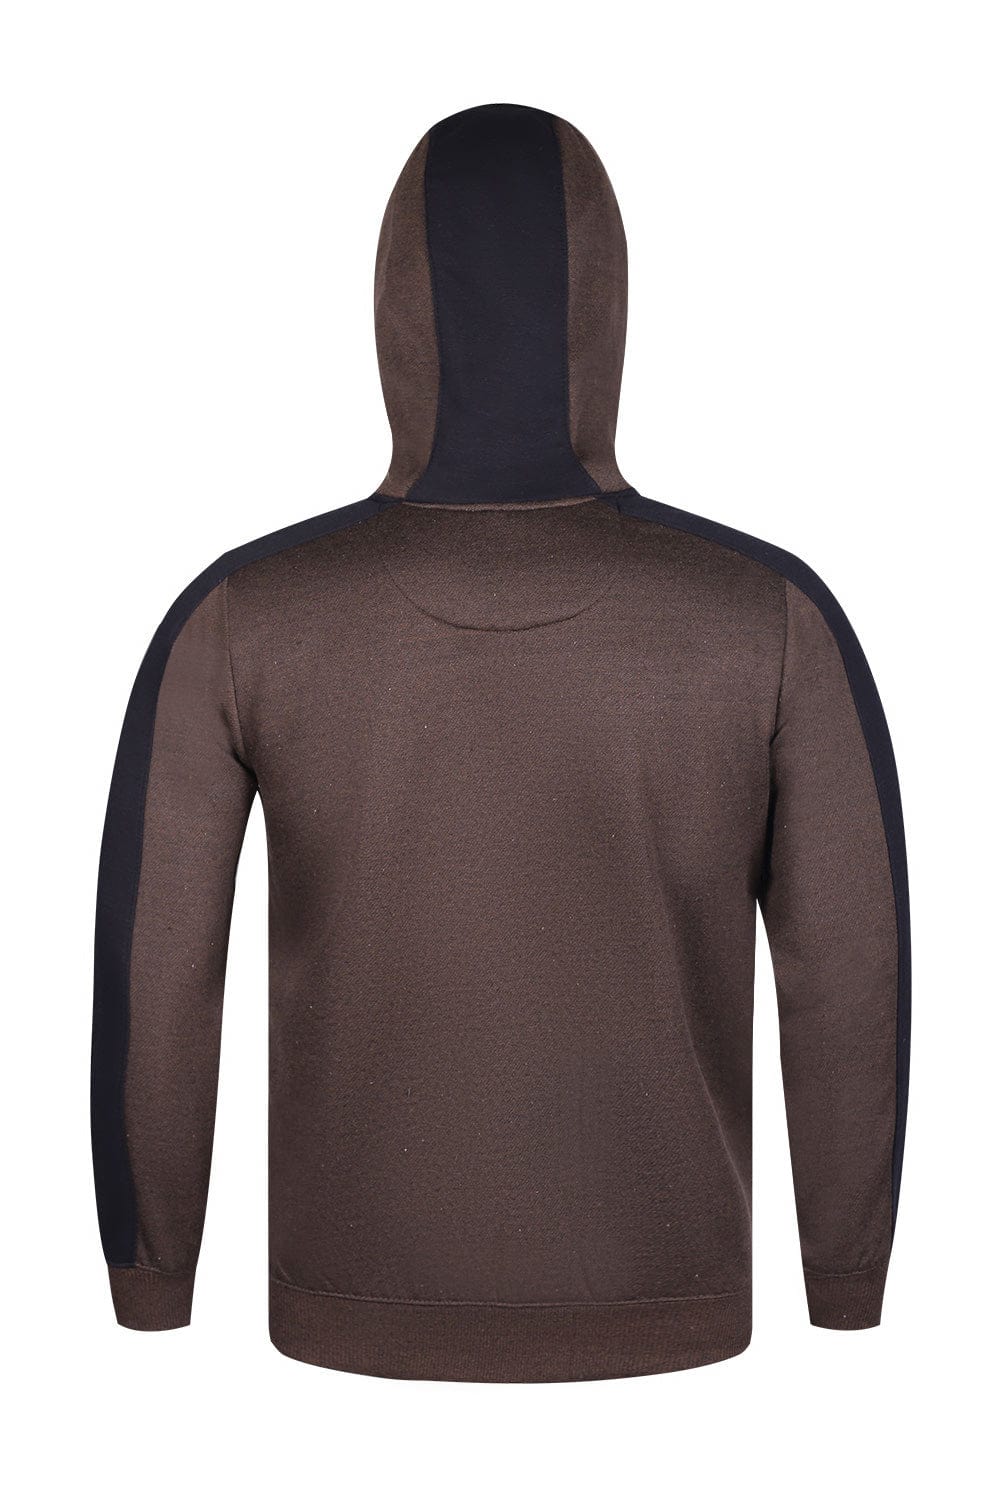 Hope Not Out by Shahid Afridi Men Hoody Premium Zipper Hood with Cut and Sew Panels